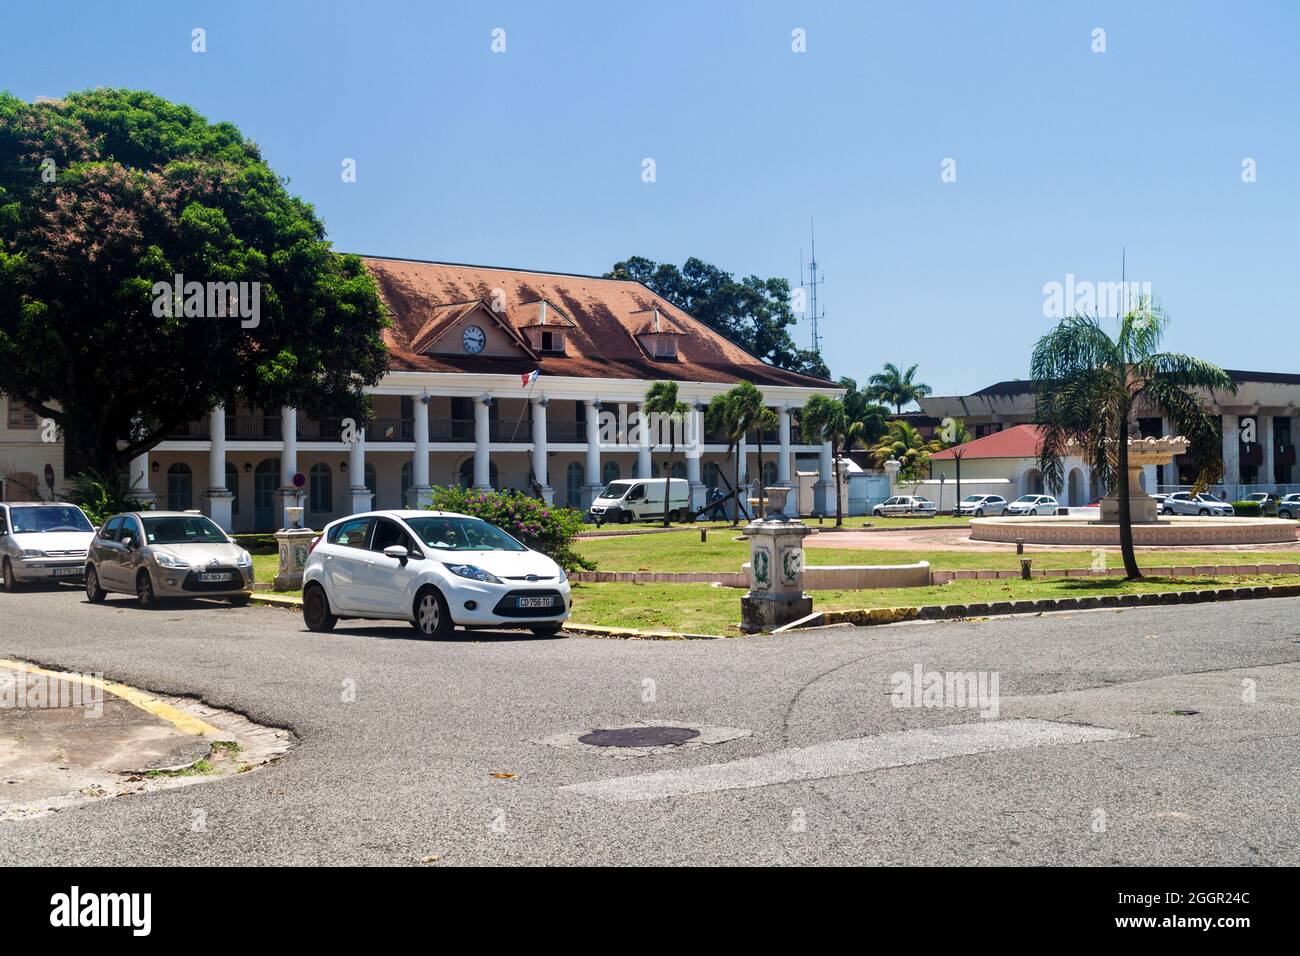 CAYENNE, FRENCH GUIANA - AUGUST 3, 2015: View of Place Leopold Heder square in Cayenne, capital of French Guiana. Stock Photo